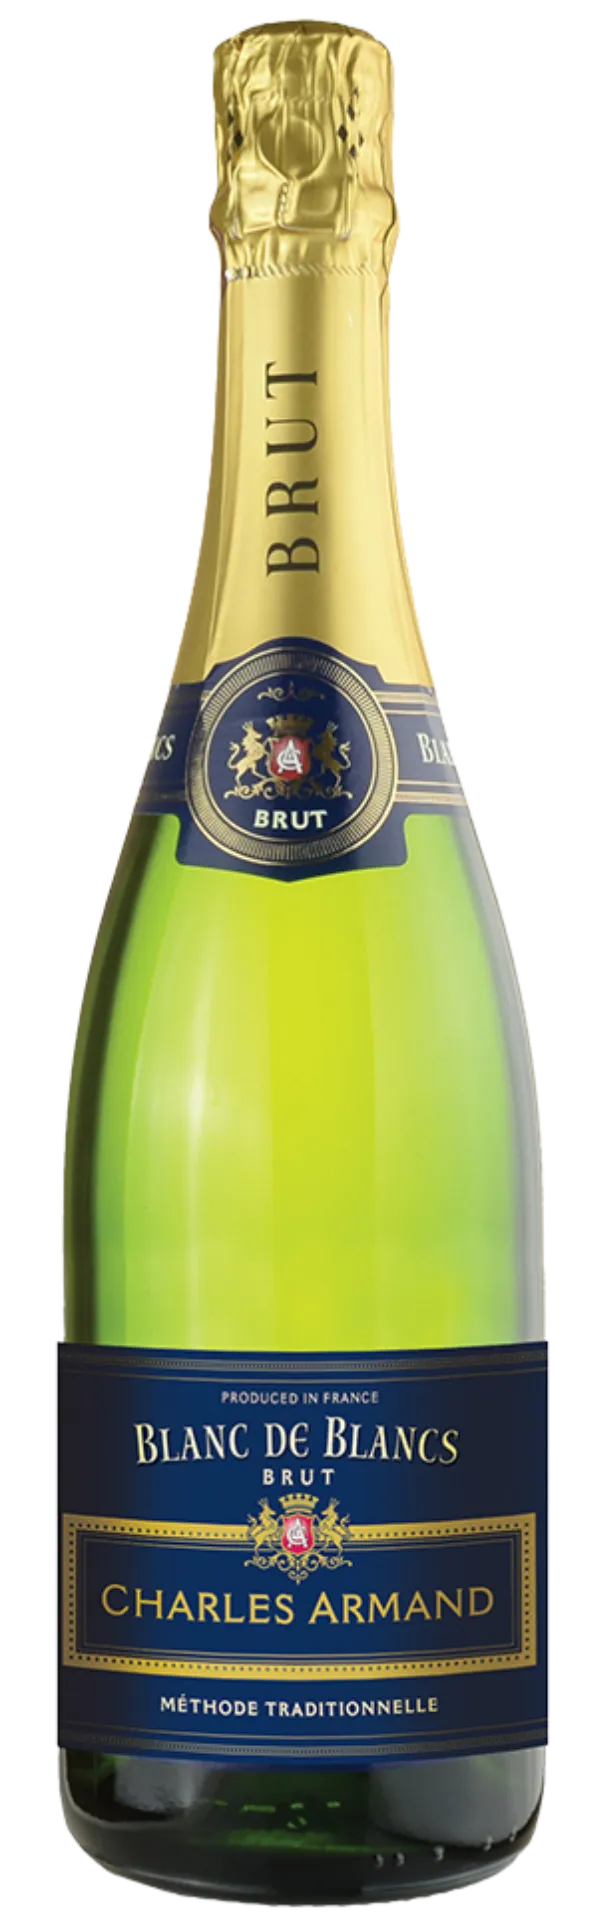 Bottle of Charles Armand Blanc de Blancs Brut from search results